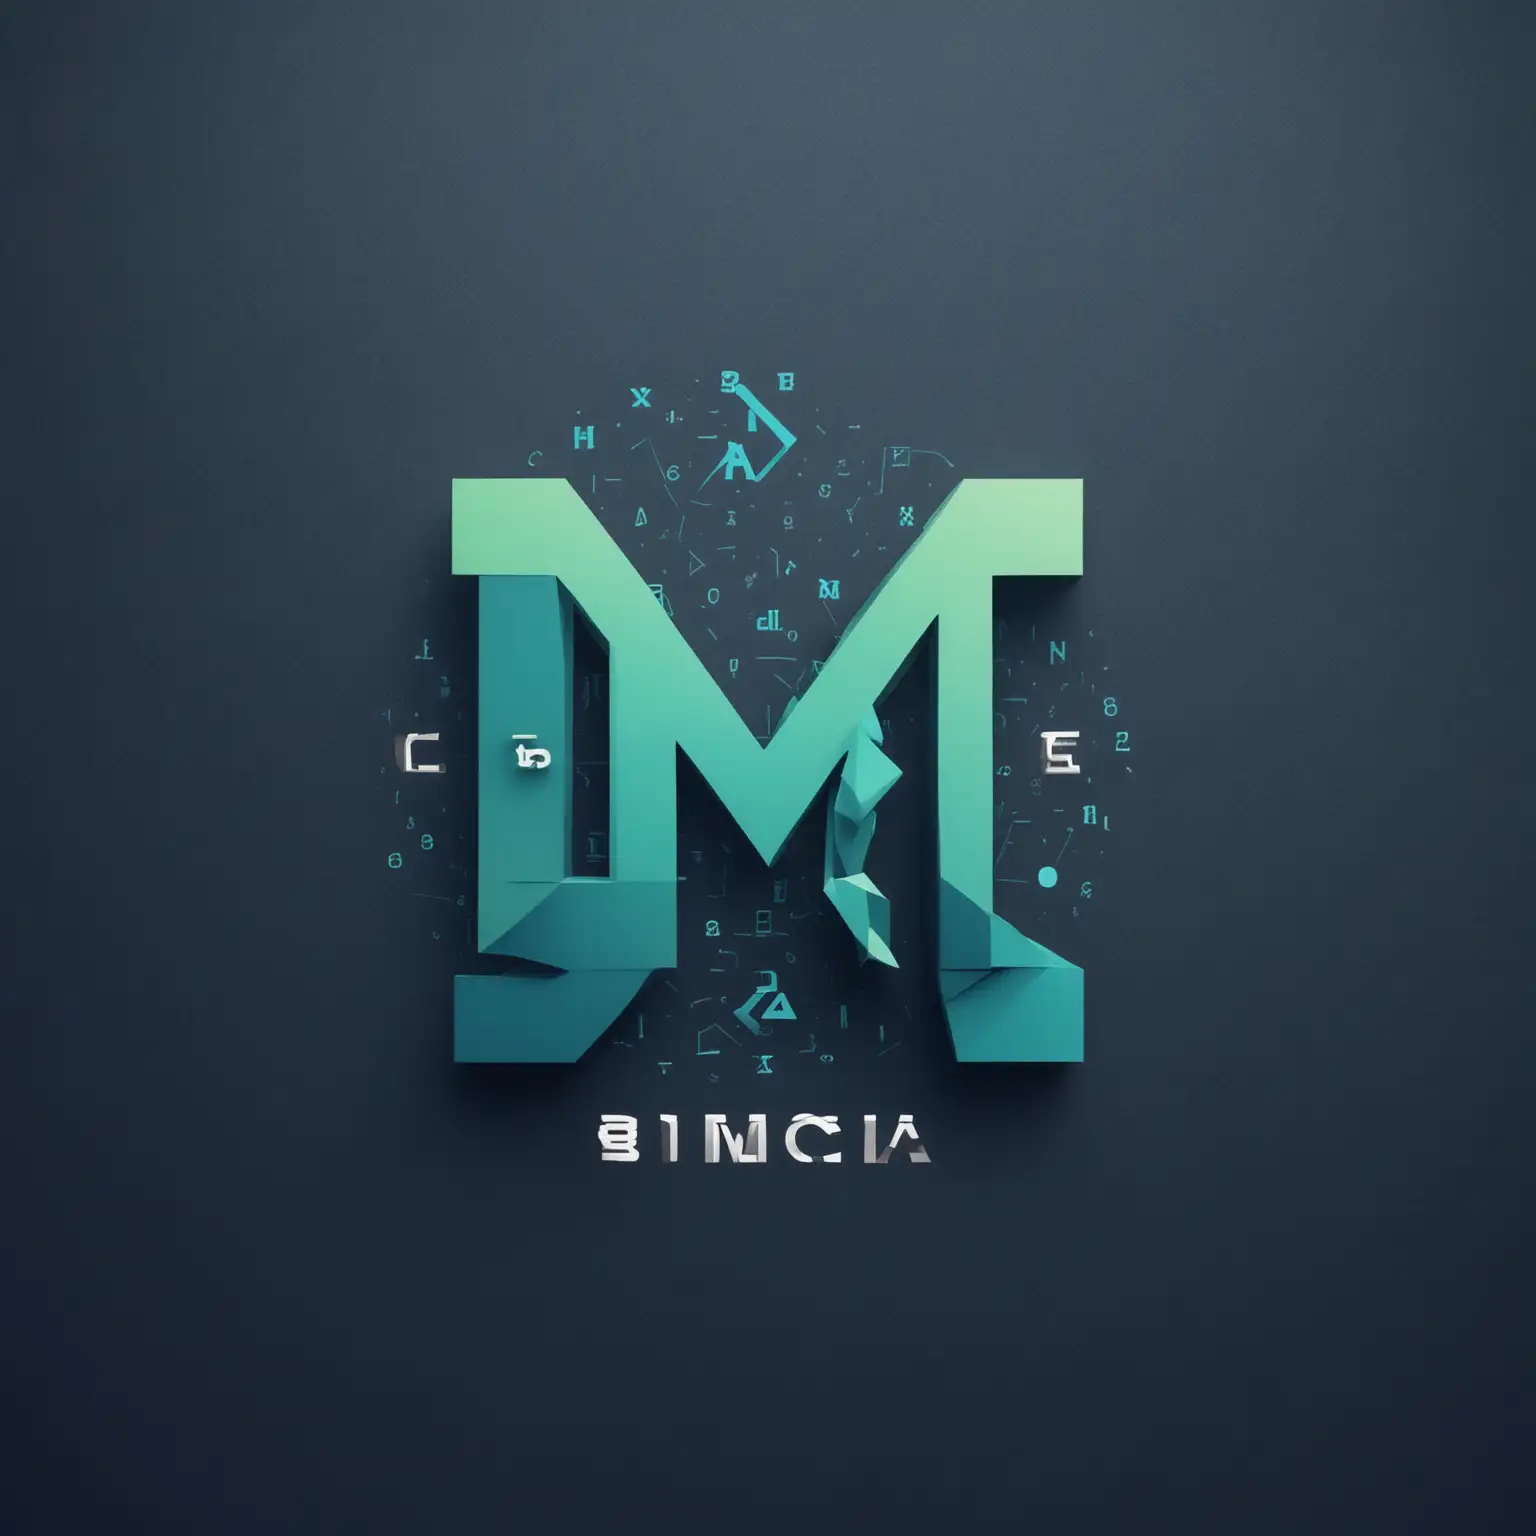 logo for a company, name Binomial, hedge fund, math, innovation, technology, high intelligence, solid, green and blue, strength